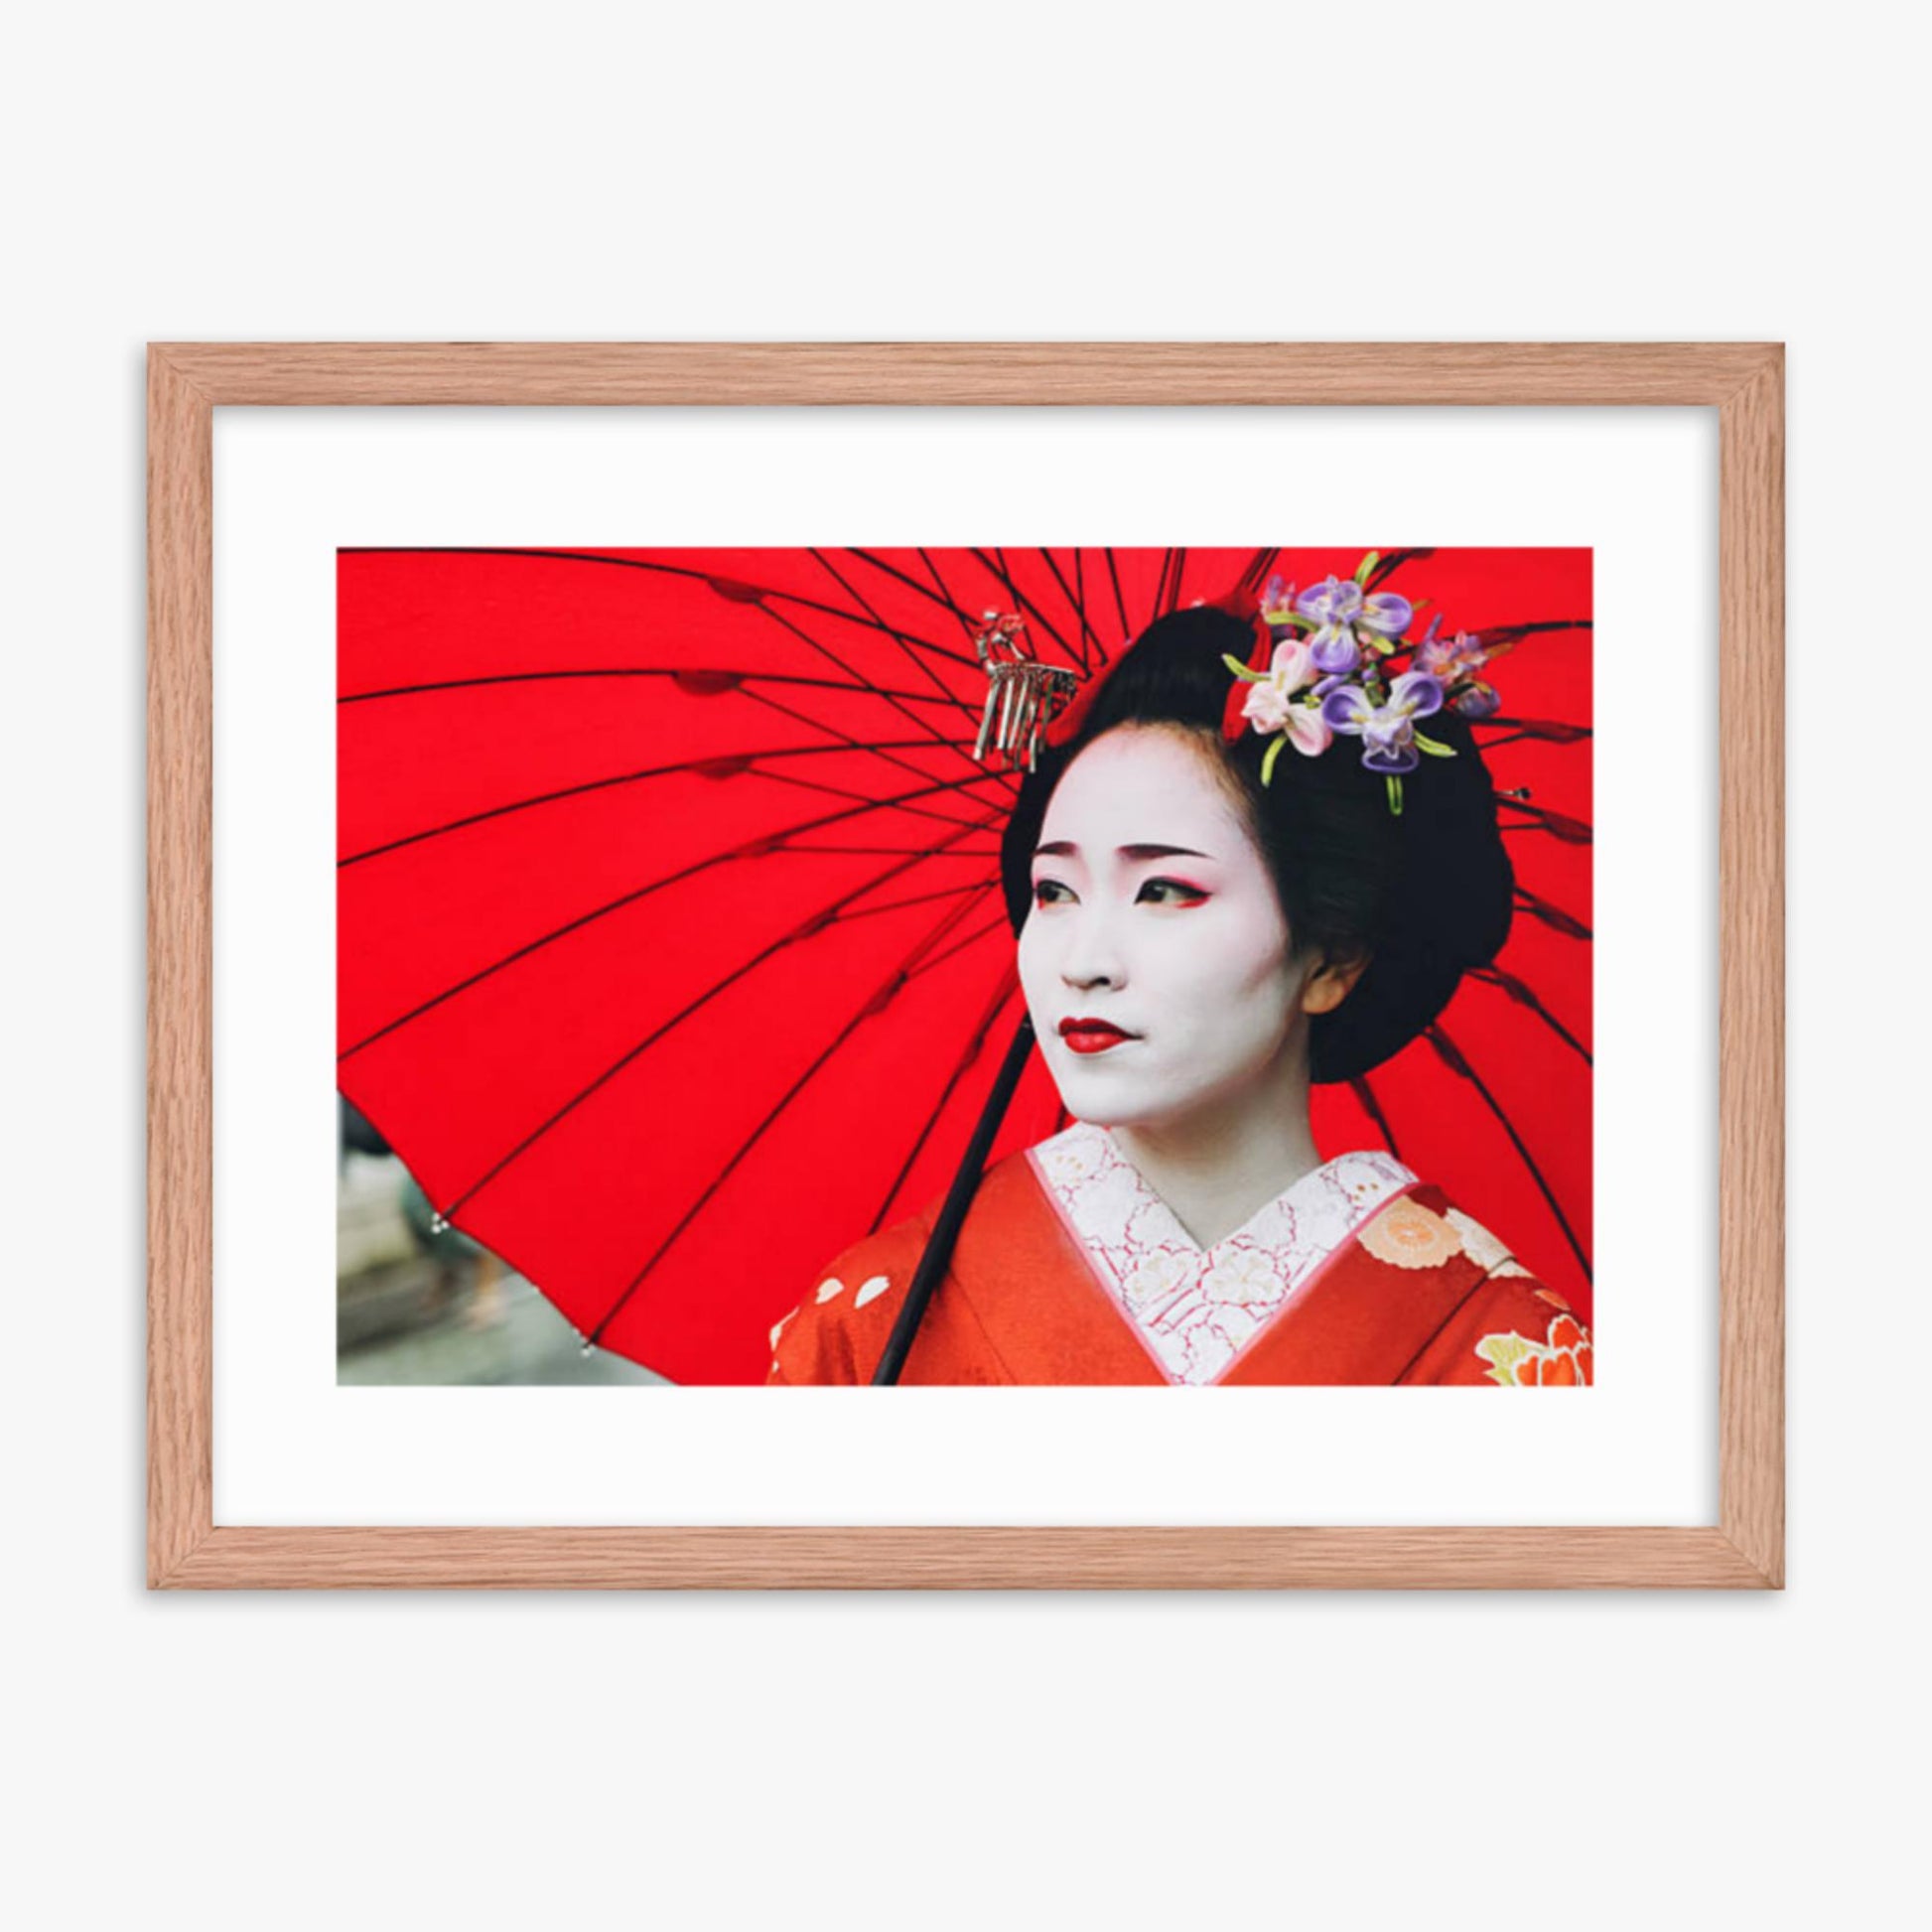 Maiko Girl Portrait 18x24 in Poster With Oak Frame